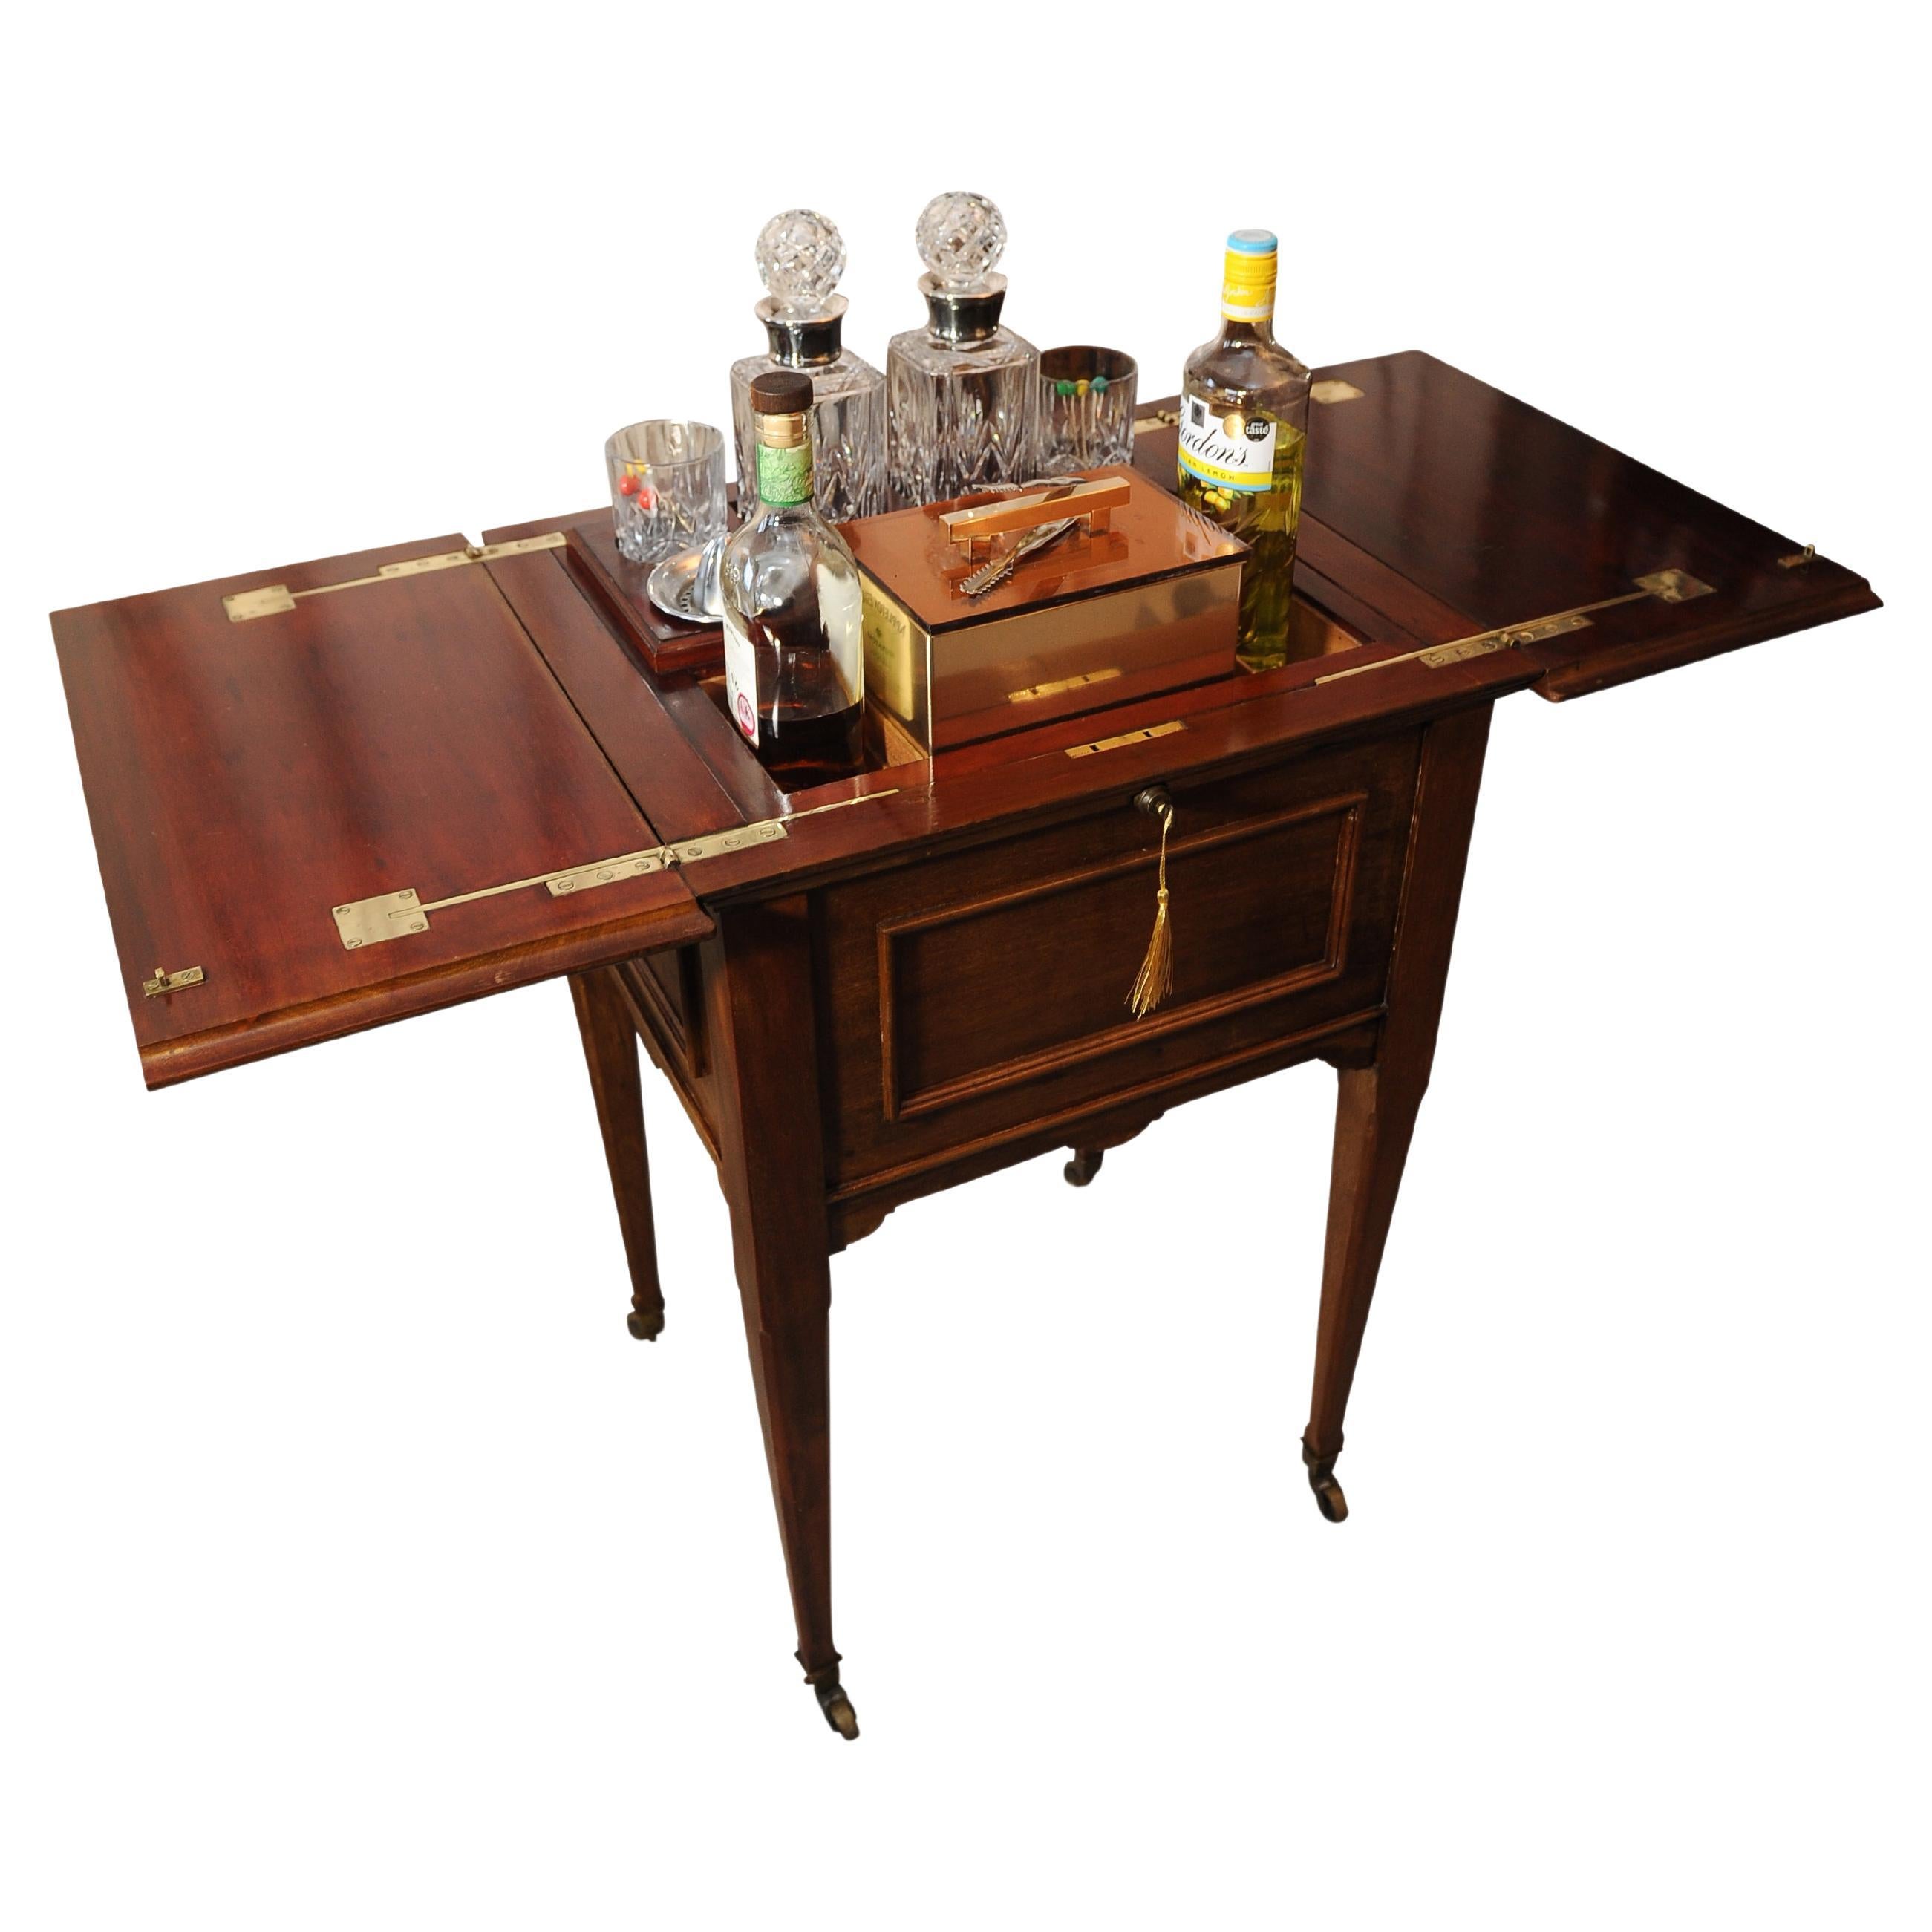 Luxurious London Made 1920s Pop Up Dry Bar Drinks Cabinet and Decanters For Sale